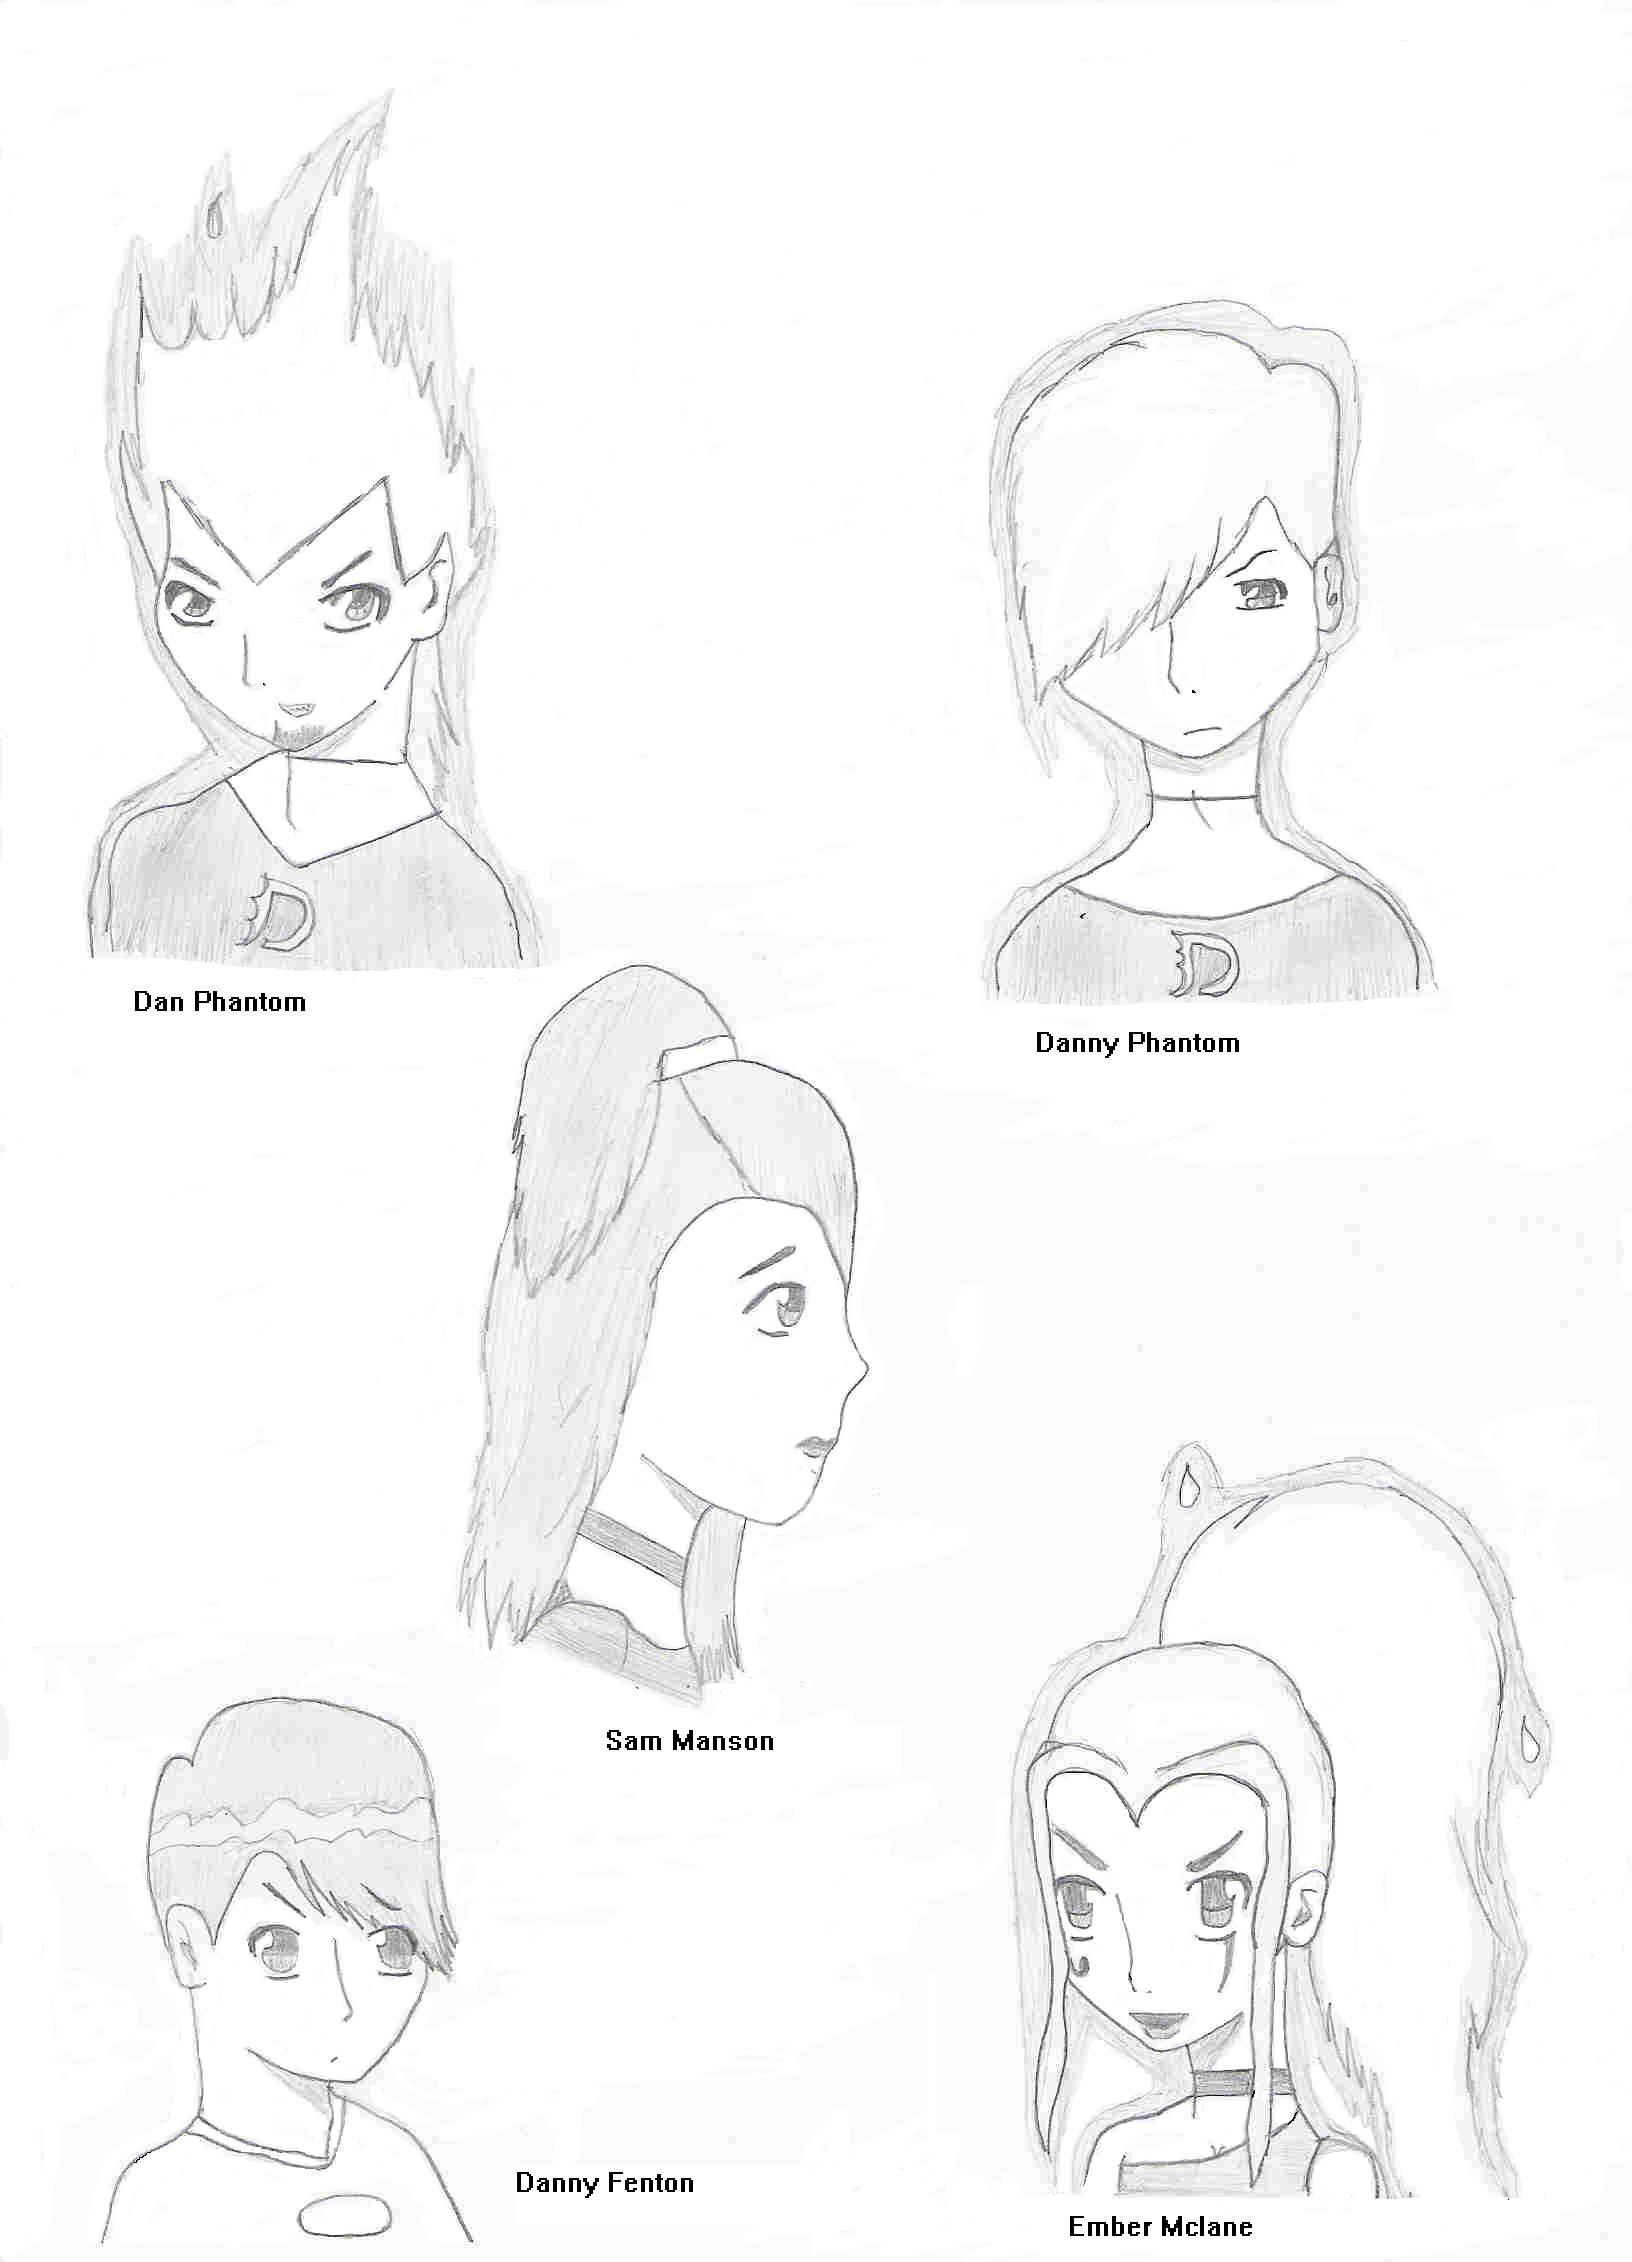 'Danny Phantom character sheet by Hieis_lover_and_obsessor